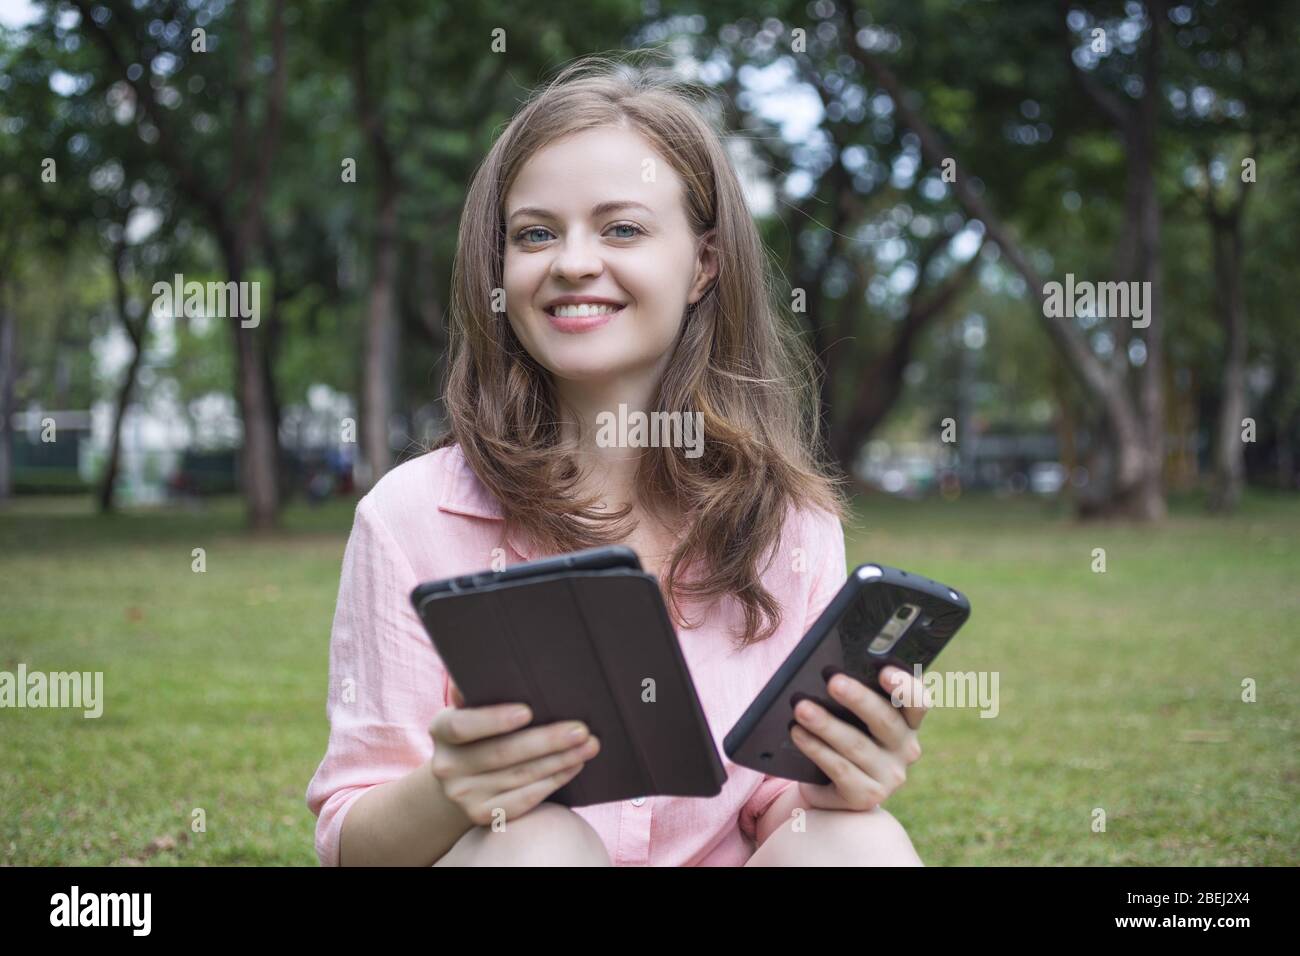 Young caucasian woman with smartphone in one hand and tablet in another looking at the camera and smiling. Outdoor portrait. Stock Photo